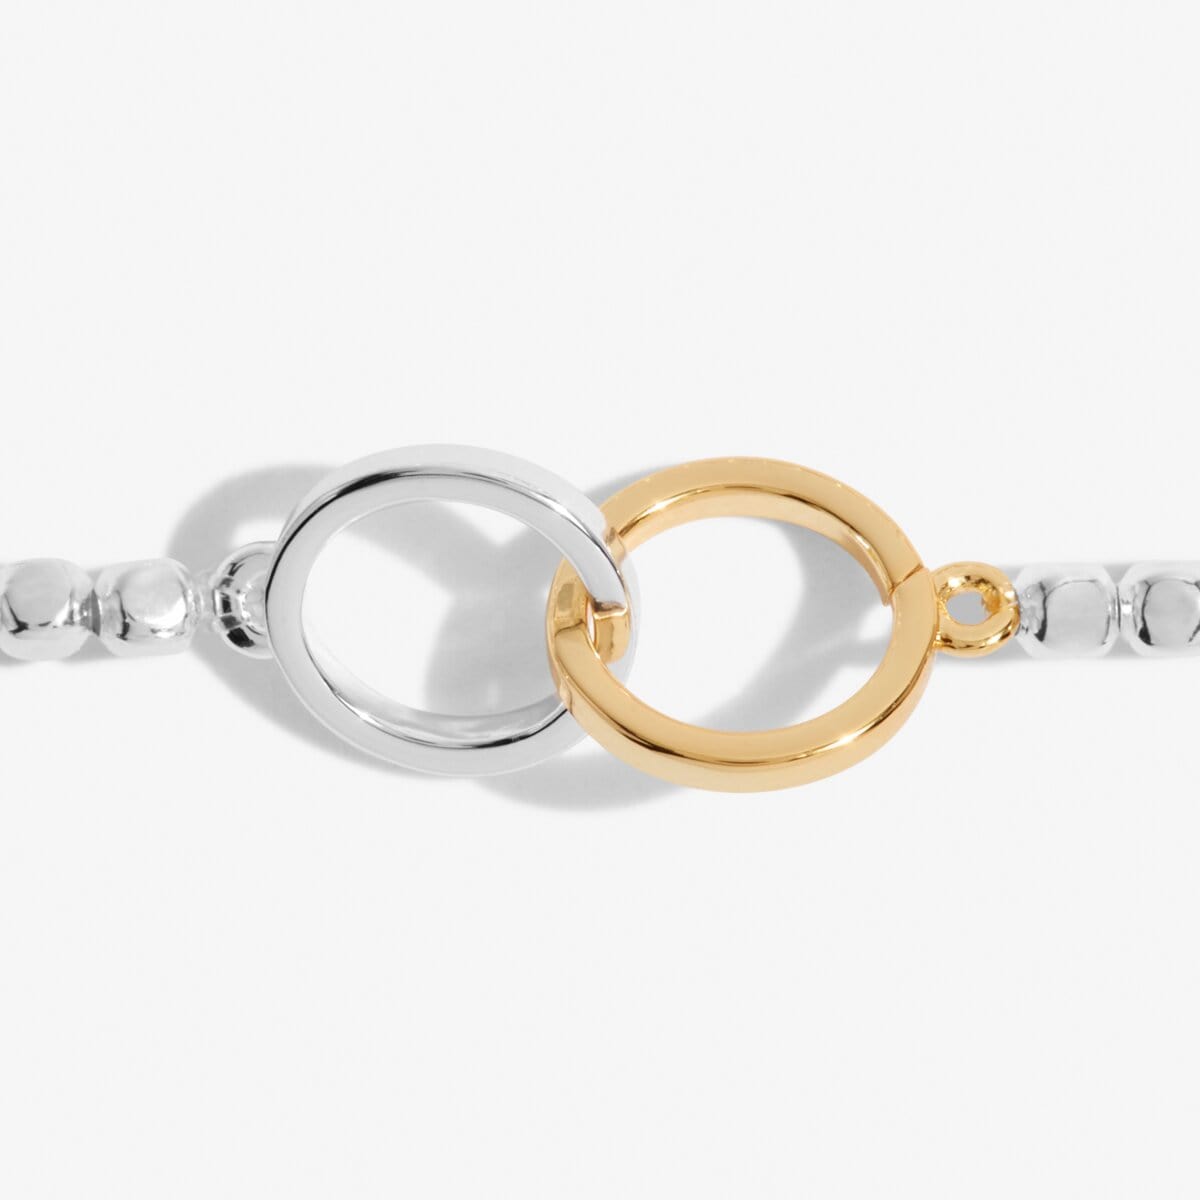 Joma Jewellery Bracelets Joma Jewellery Forever Yours Bracelet - Something Special Just For You